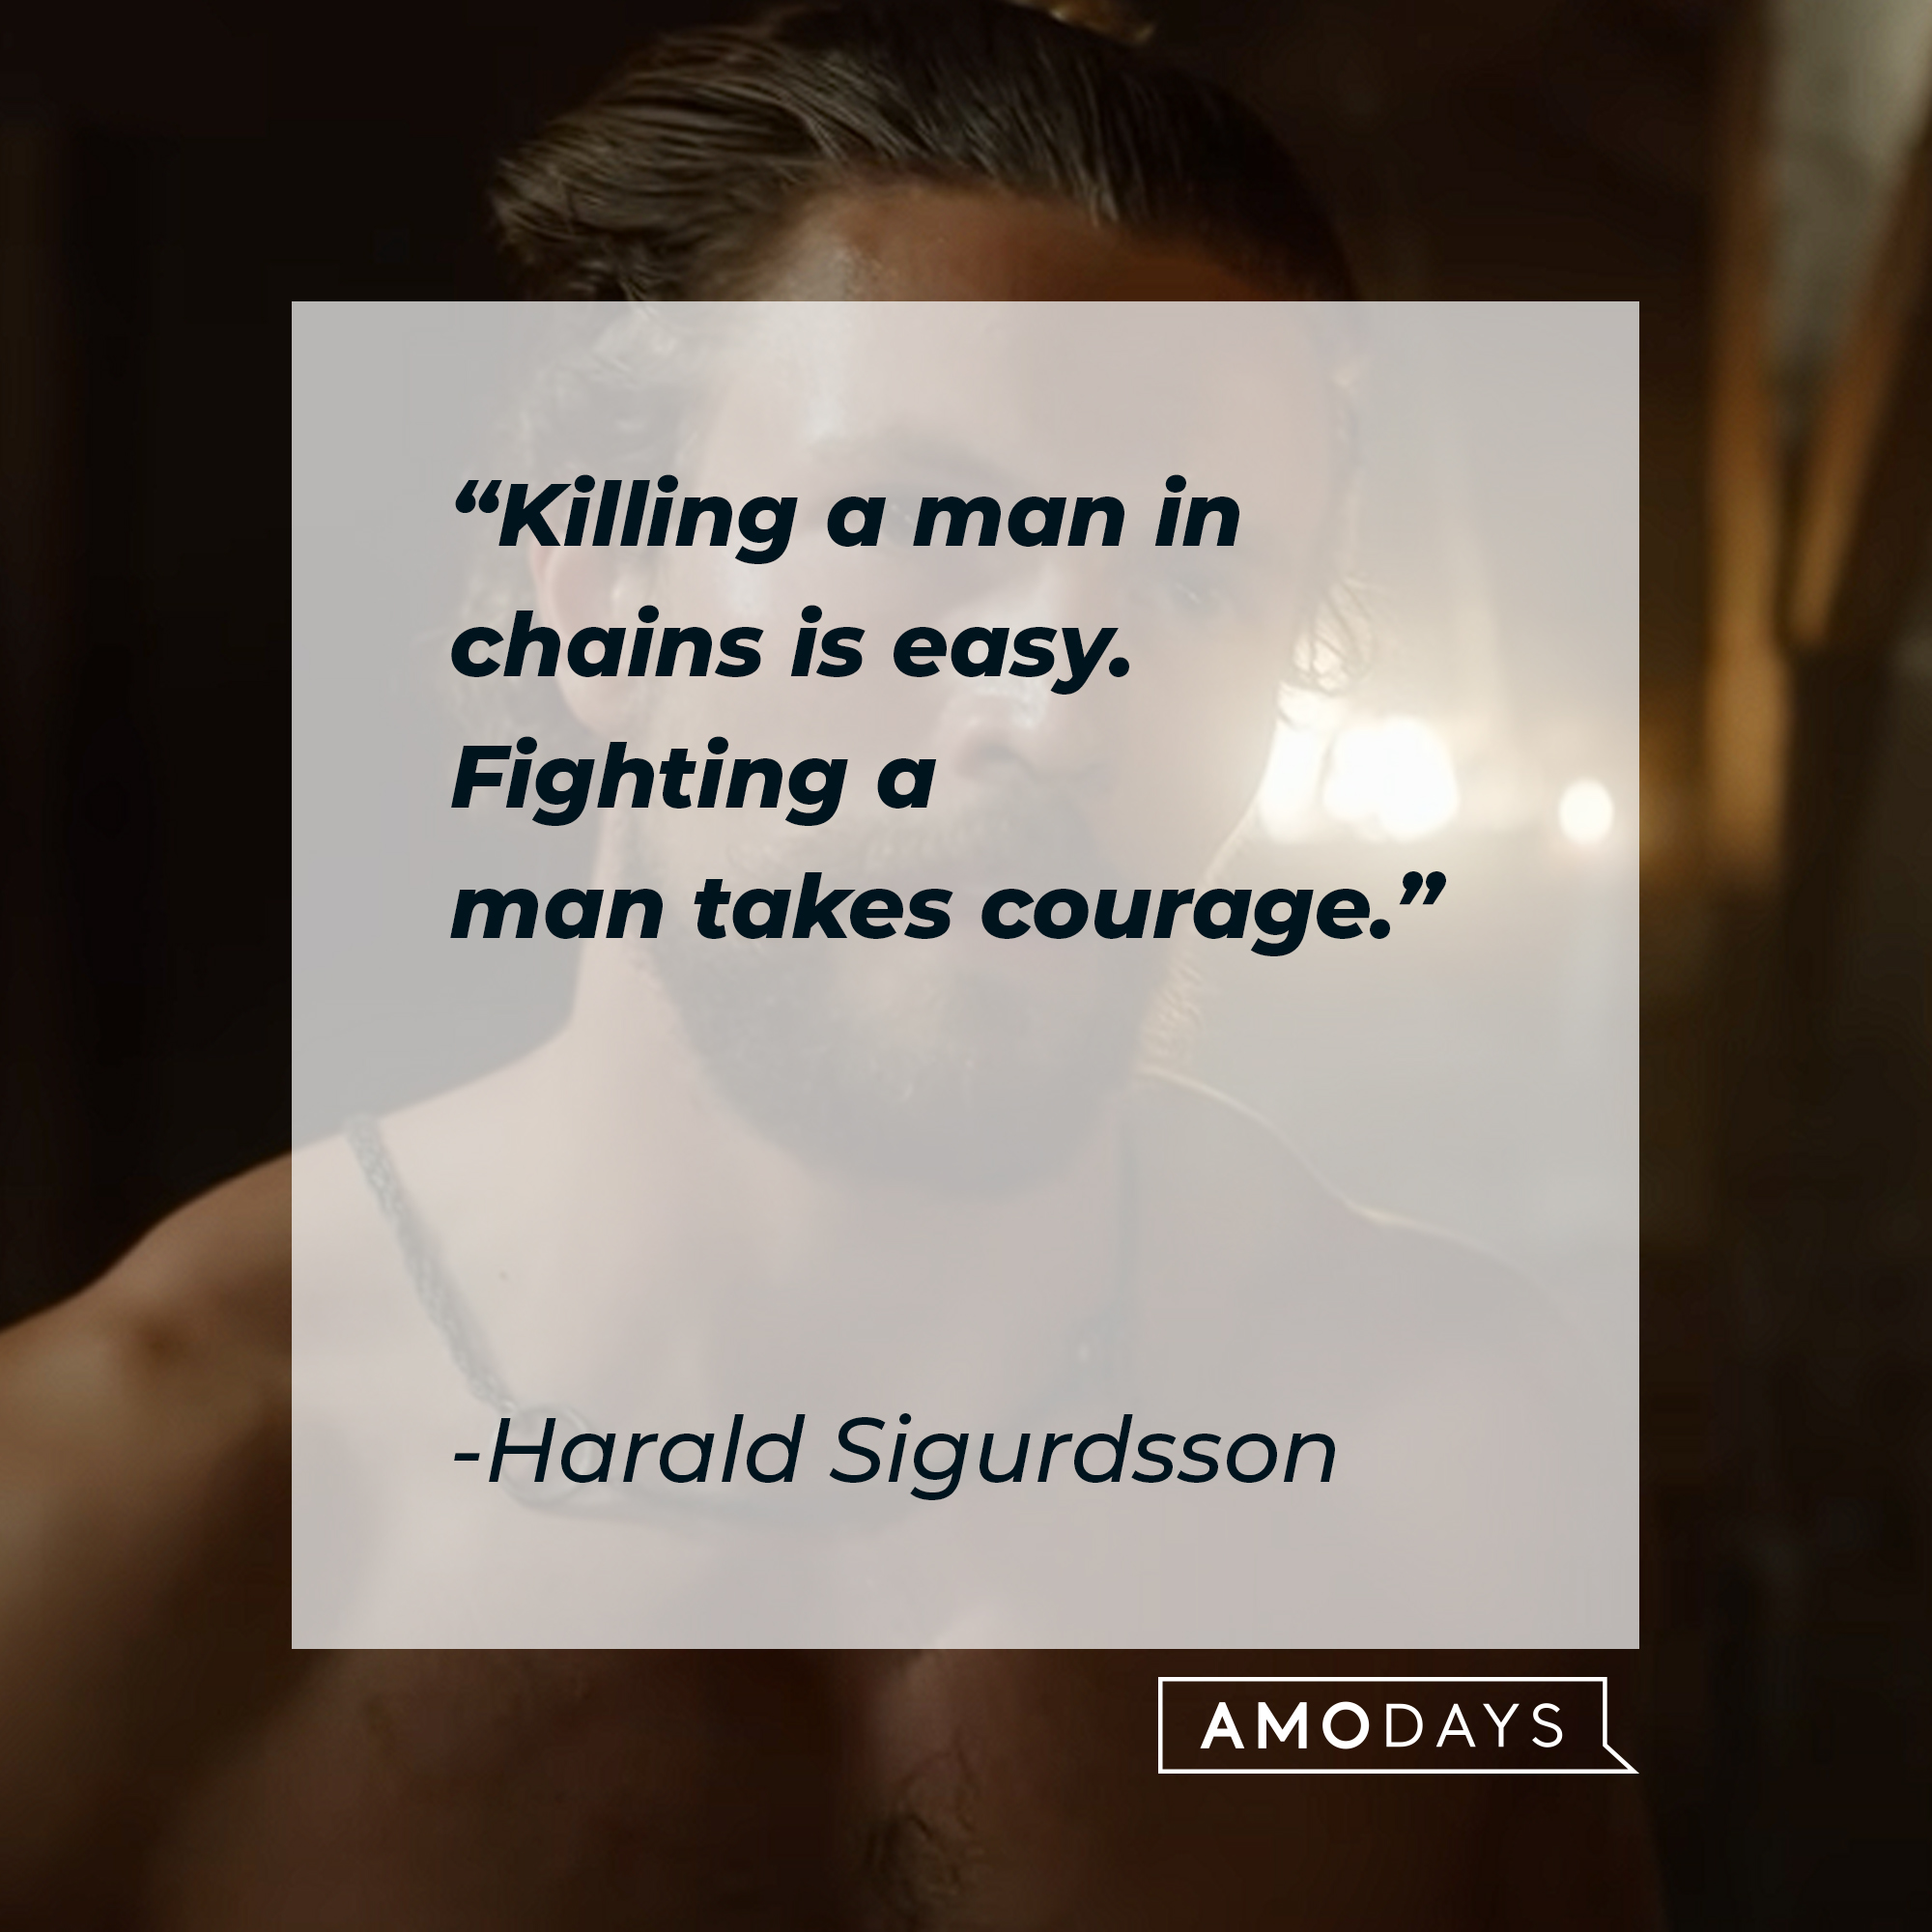 A picture of Harald Sigurdsson with his quote, “Killing a man in chains is easy. Fighting a man takes courage.”| Source: youtube.com/Netflix